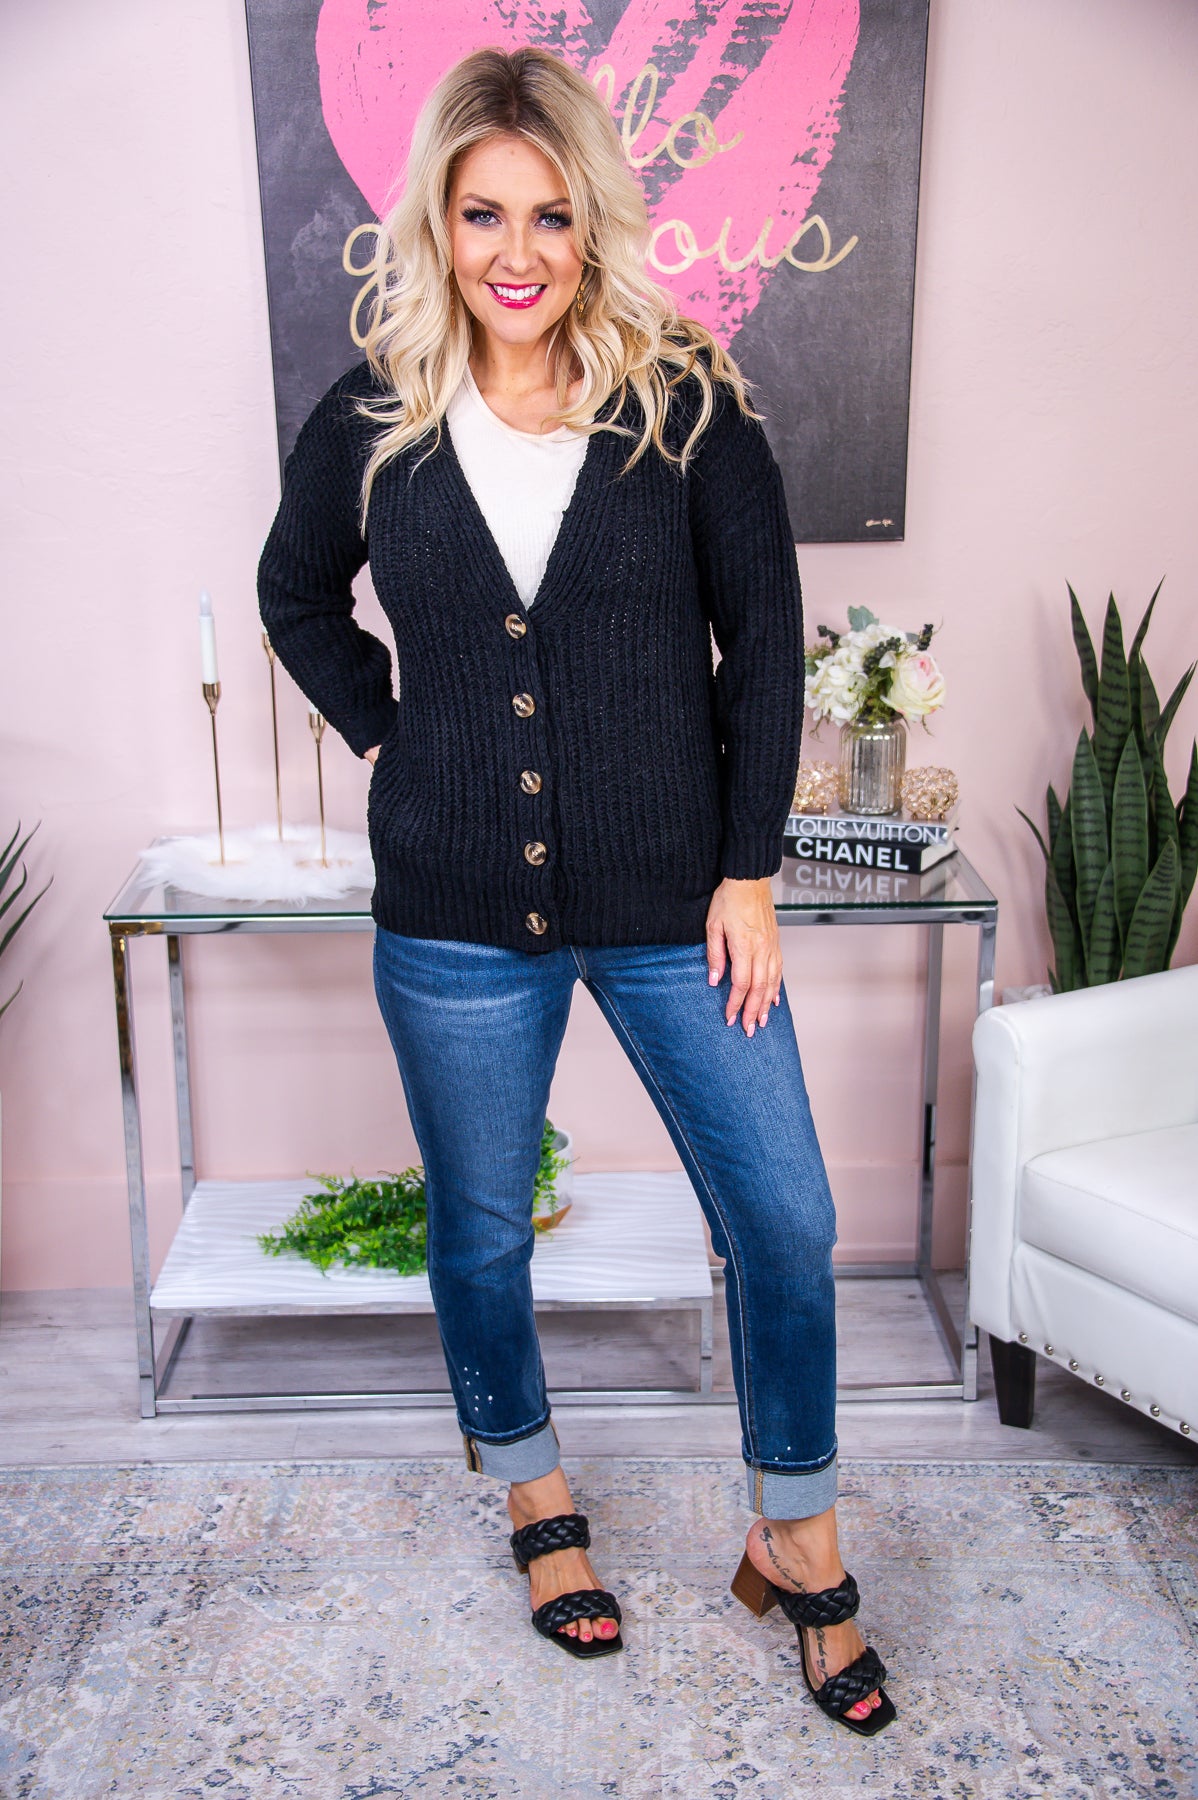 Dreaming Of Autumn Black Solid Knitted Cardigan - O4898BK